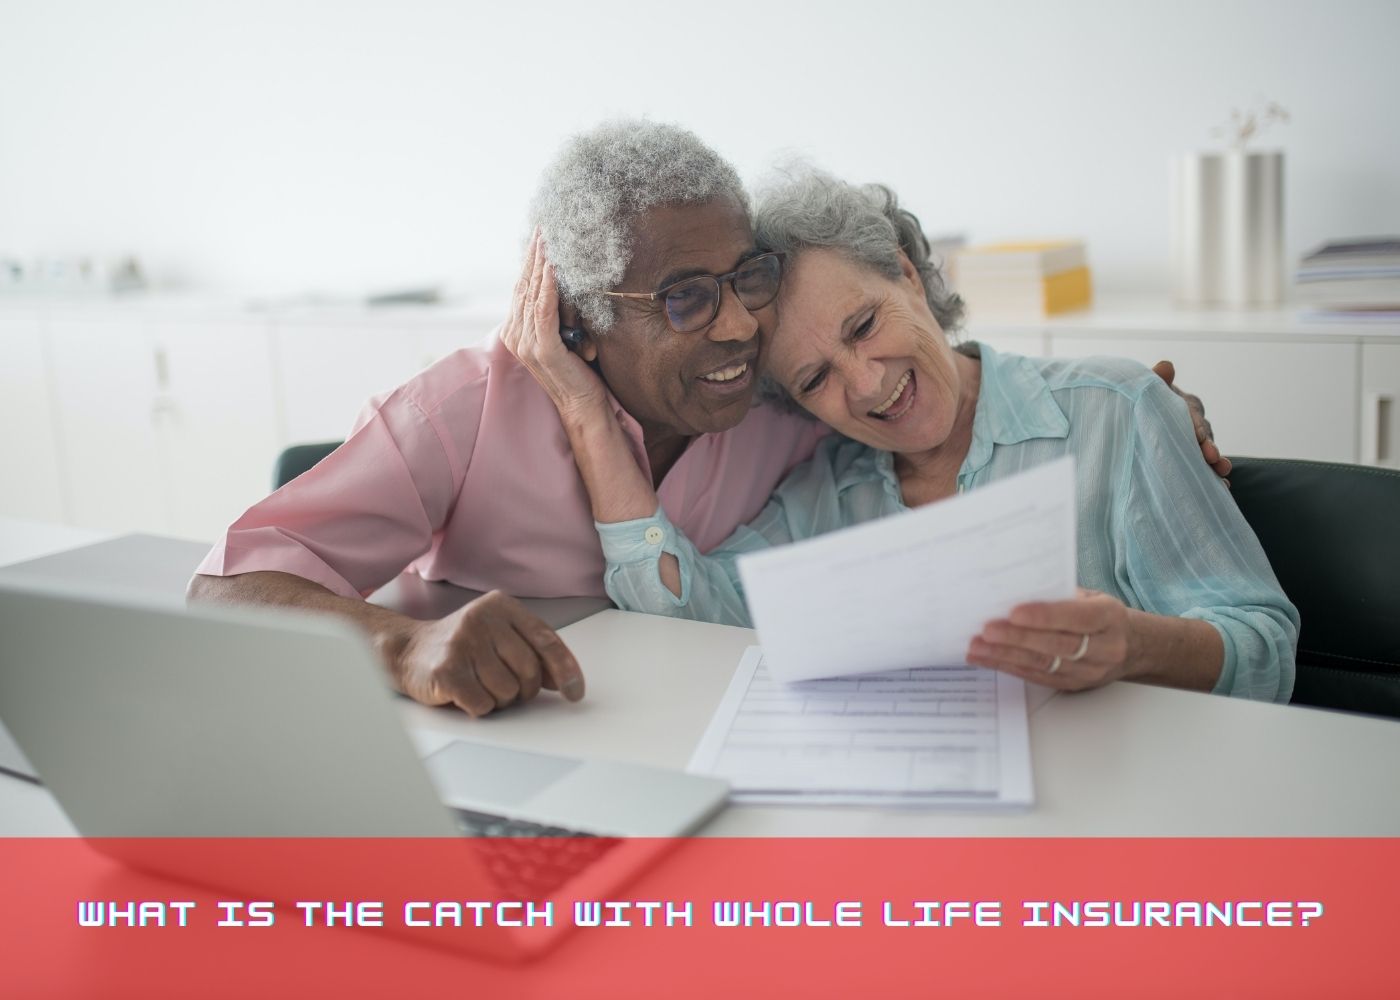 What is the catch with Whole Life insurance?